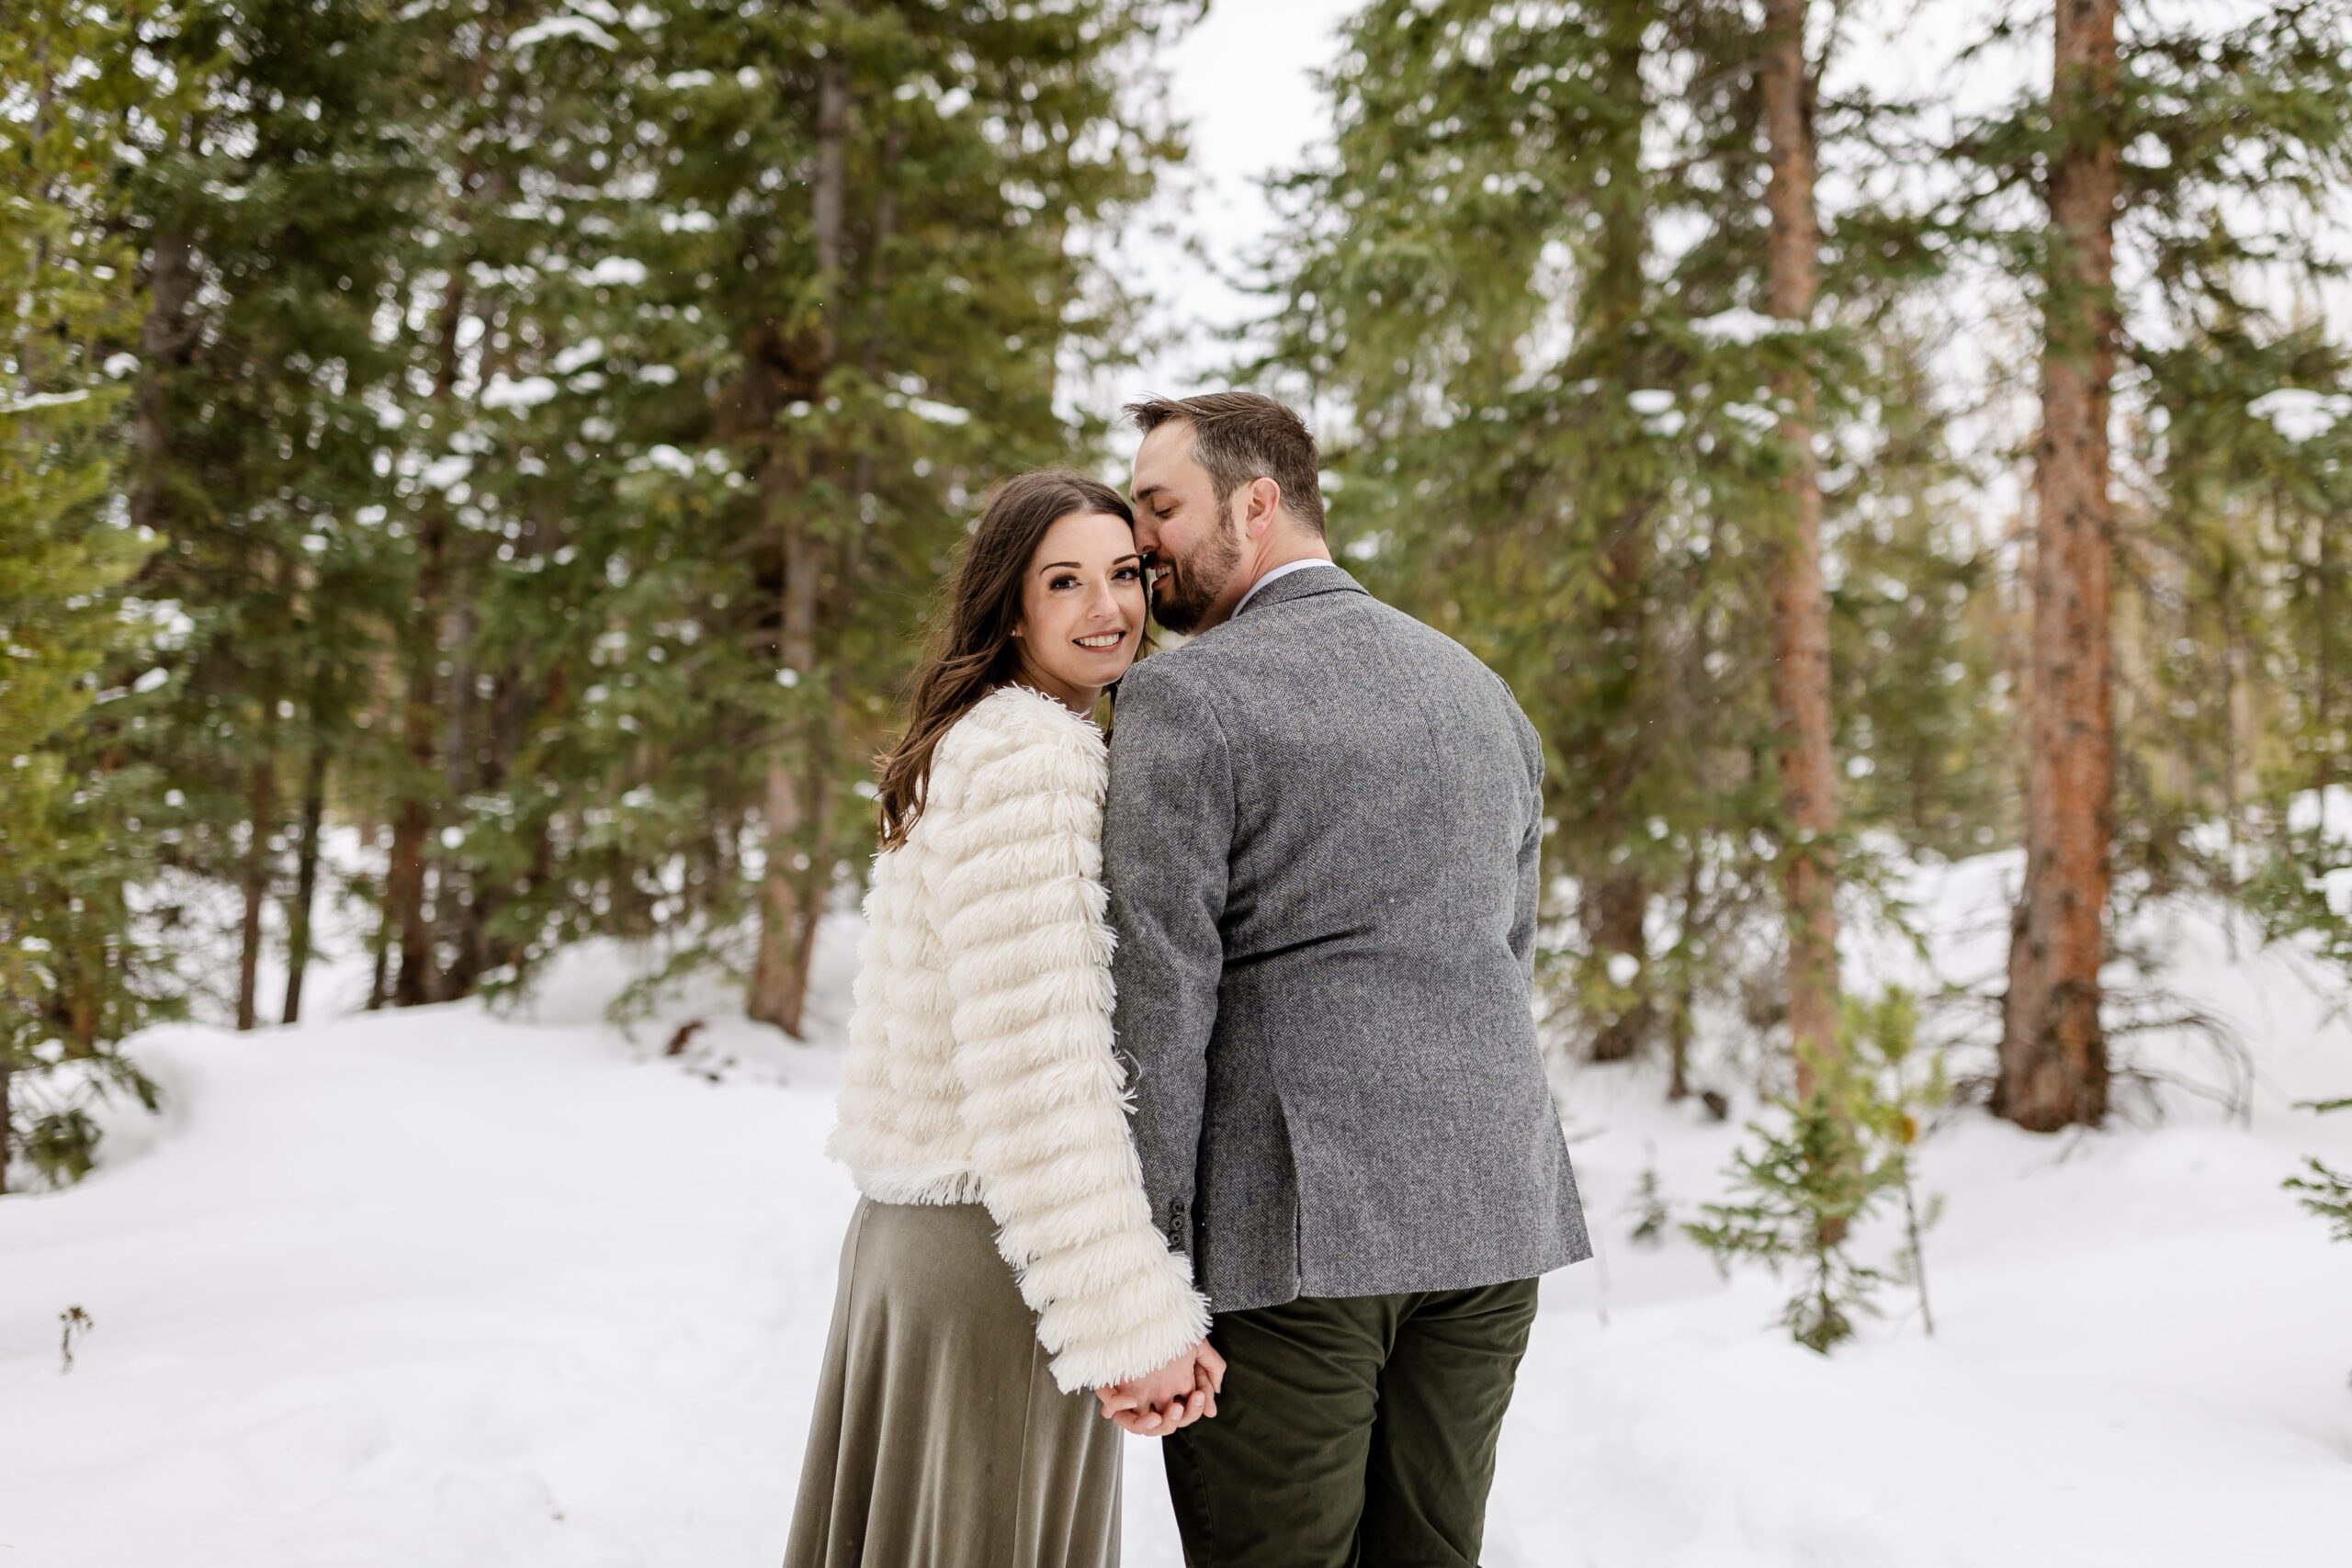 bride smiling at the camera the groom kisses her sweetly on the cheek, at their Winter Park elopement.